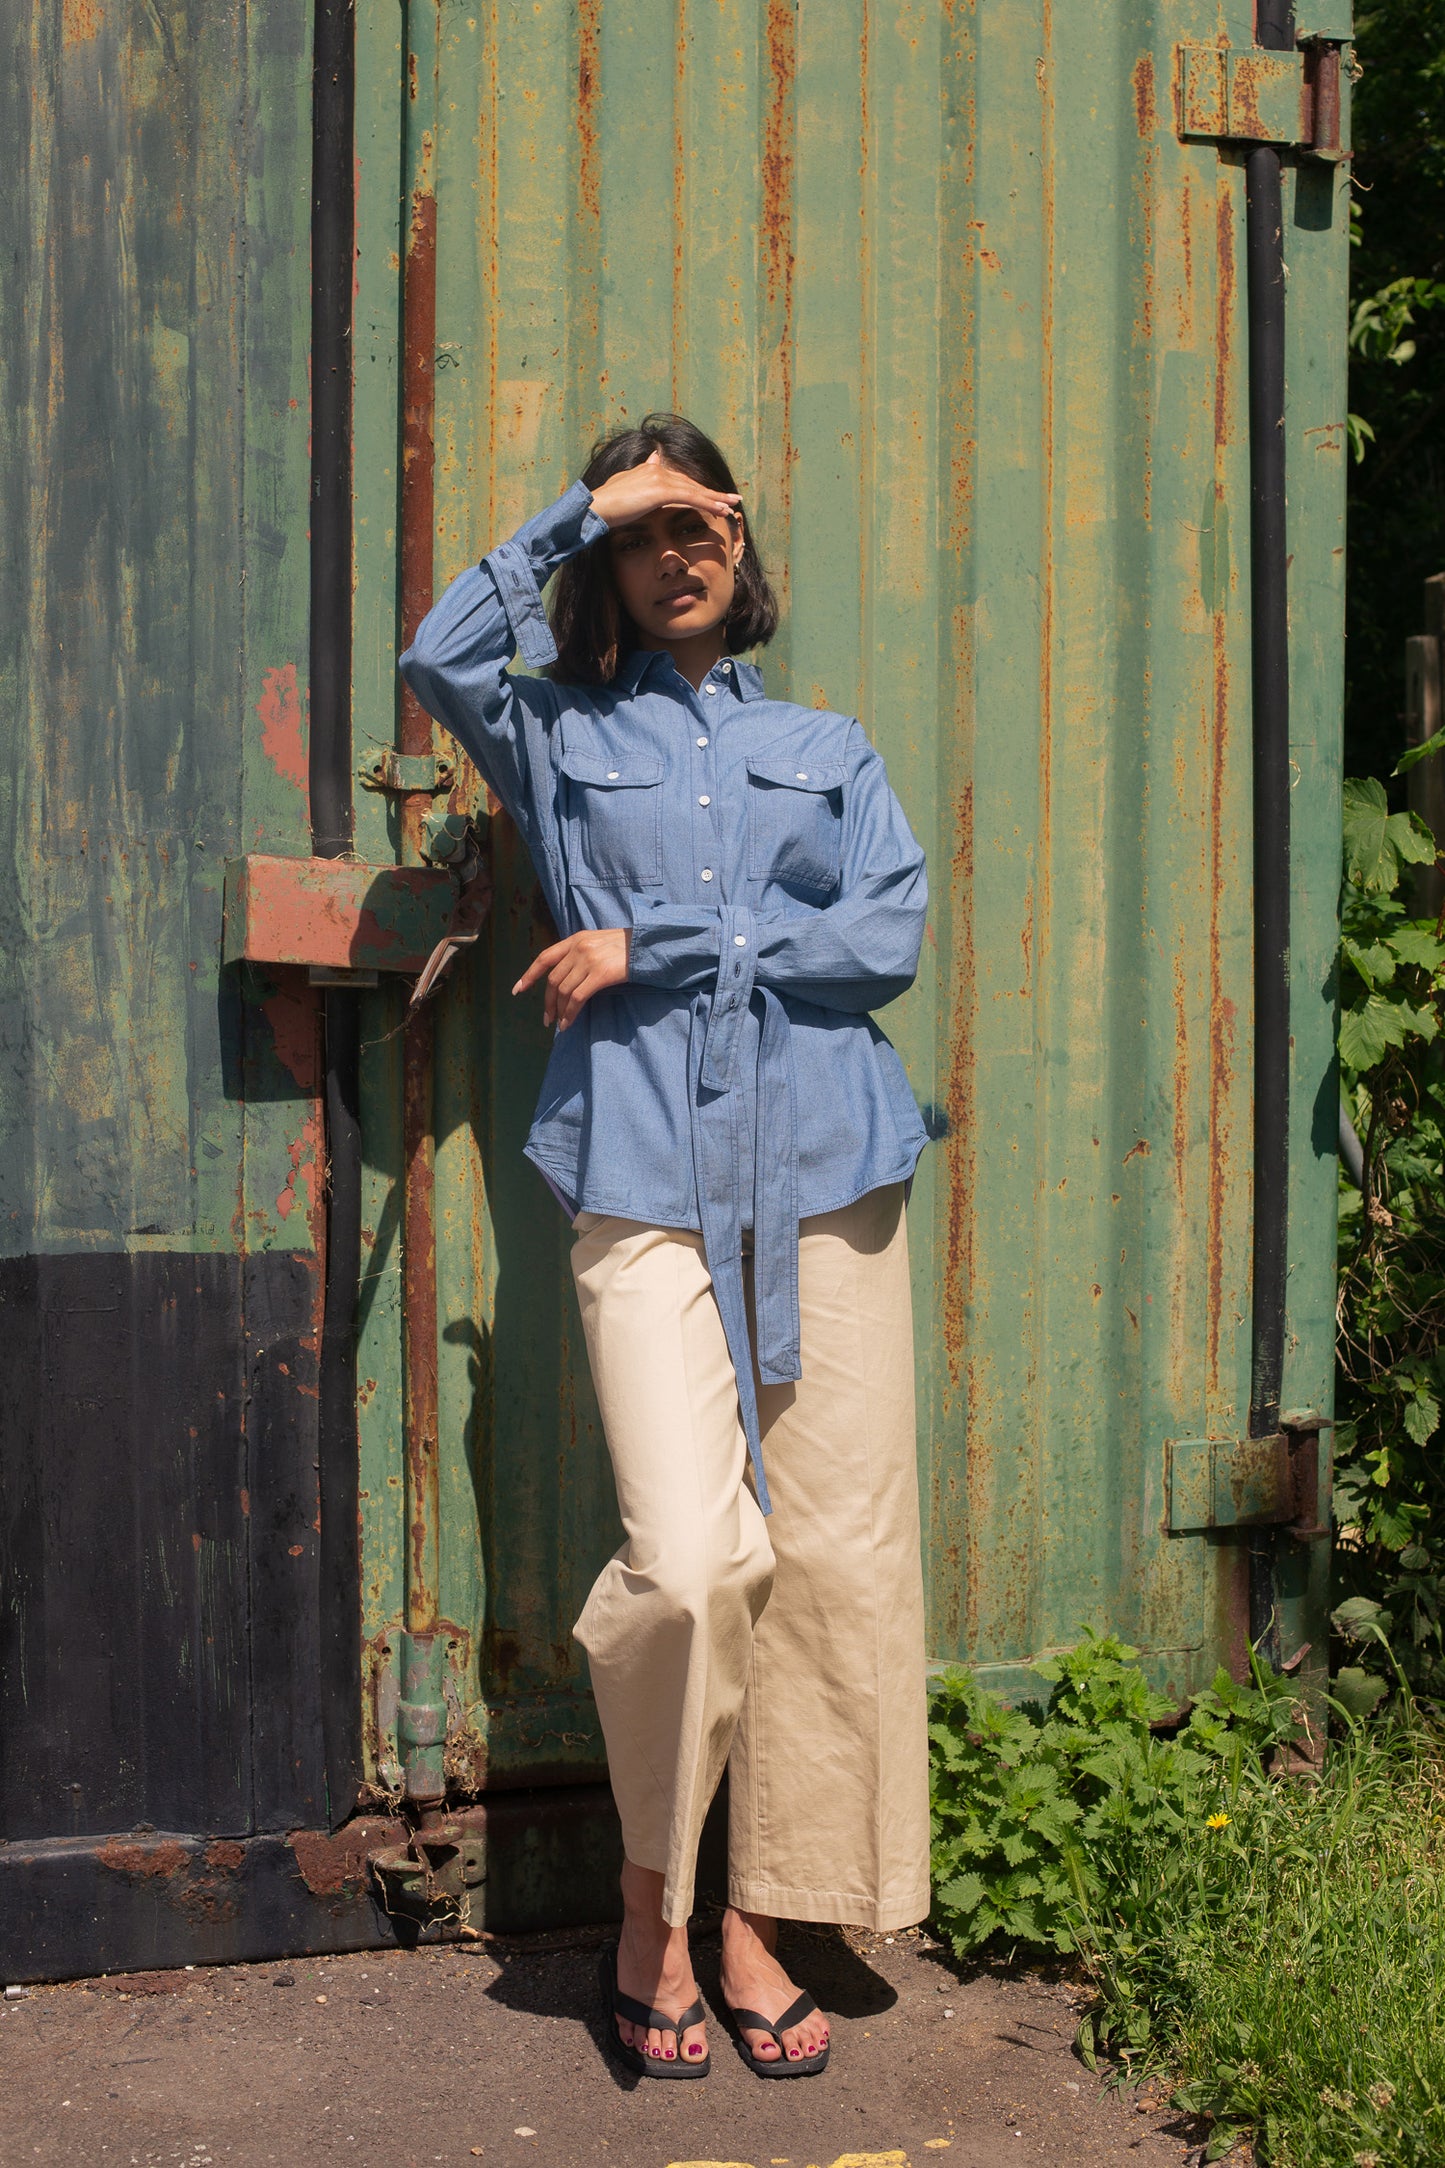 Model leans against a green shipping container, with one arm across her waist and the other to her forehead to block the sunlight. She wears Saywood's Zadie Boyfriend Shirt in Japanese Denim with a pair of beige trousers and black sandals.